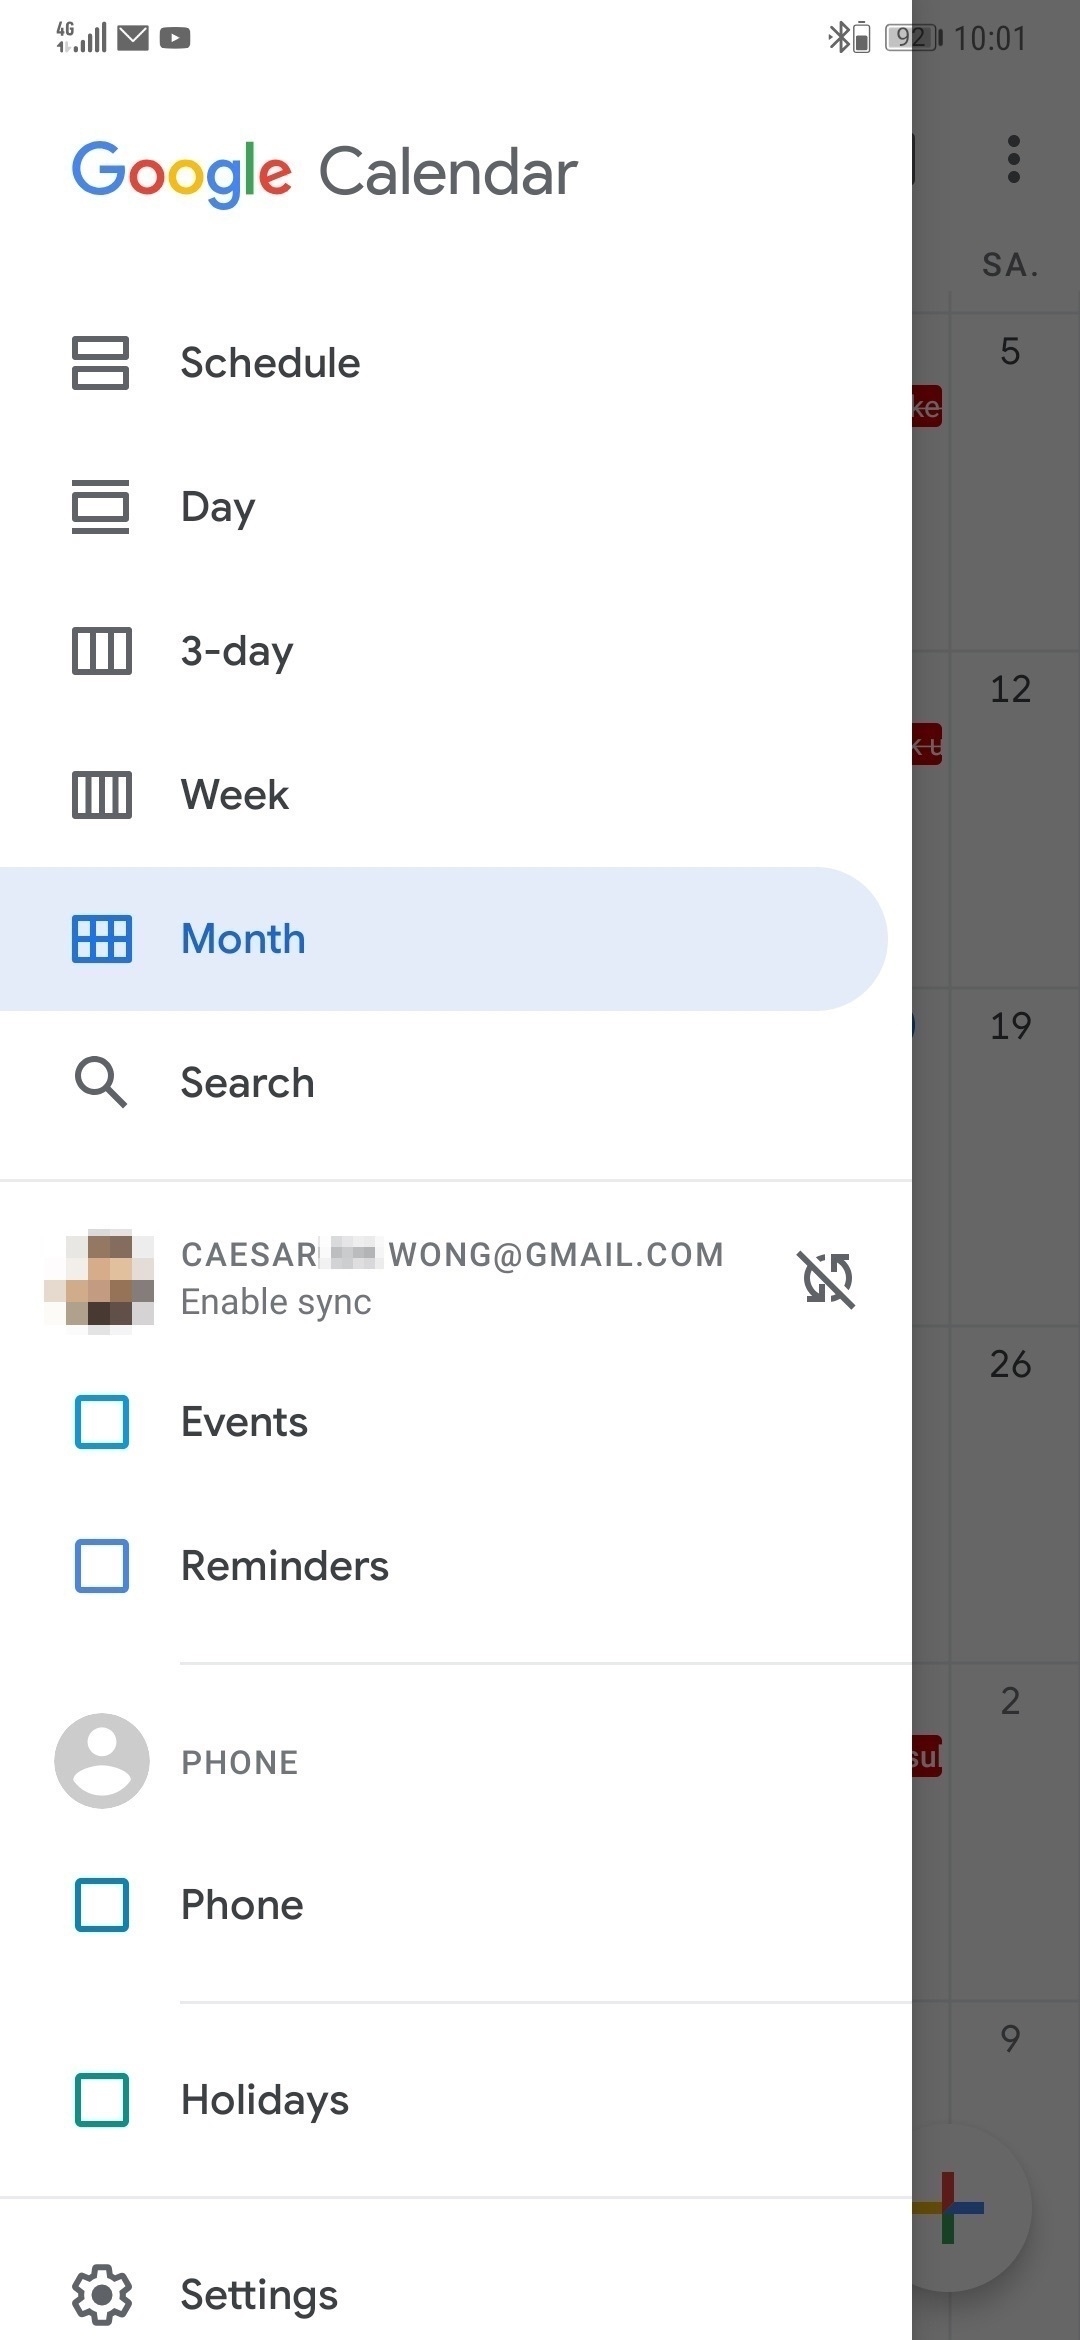 Calendar Account Gone Missing Intermittently. | Official Huawei Google Calendar Holidays Missing